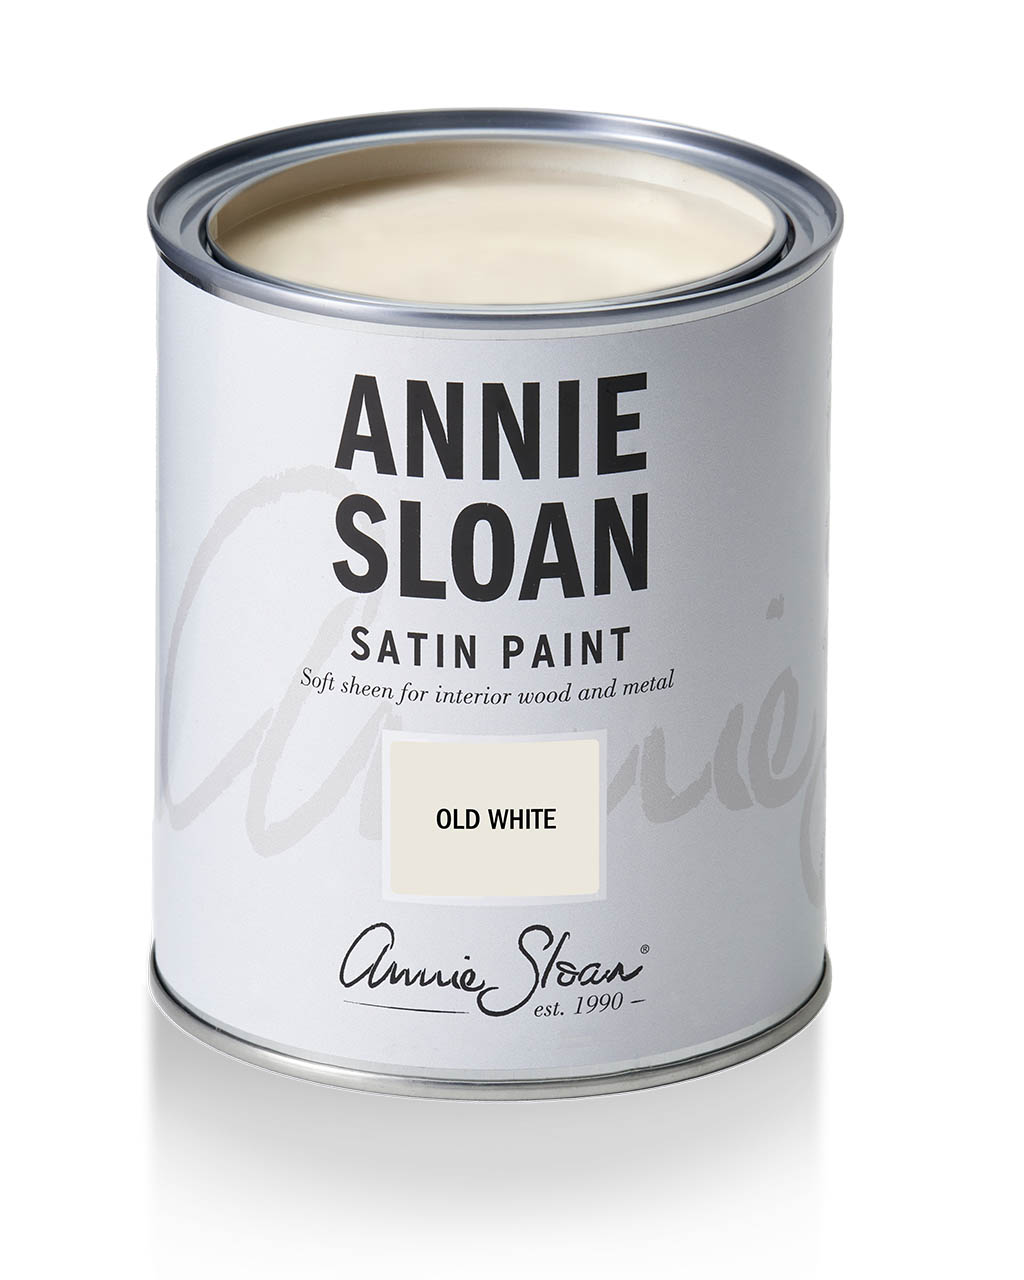 Old White Satin Paint by Annie Sloan - tin shot